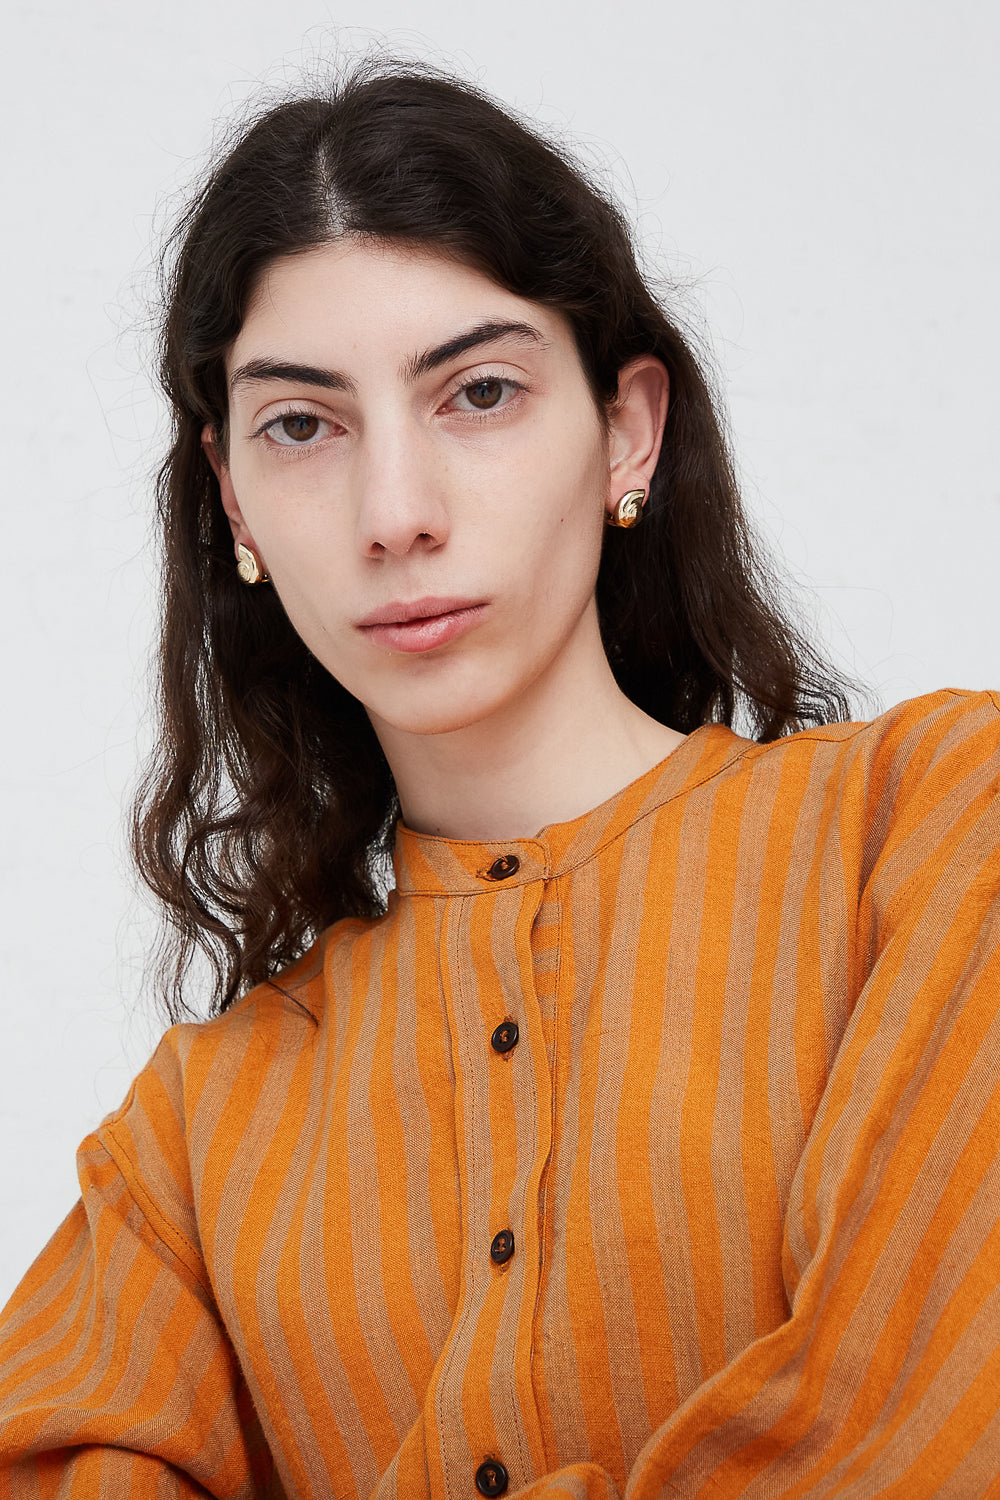 A woman in an orange striped shirt posing for a photo wearing Kathryn Bentley's Large Nautilus Earrings made in Los Angeles.